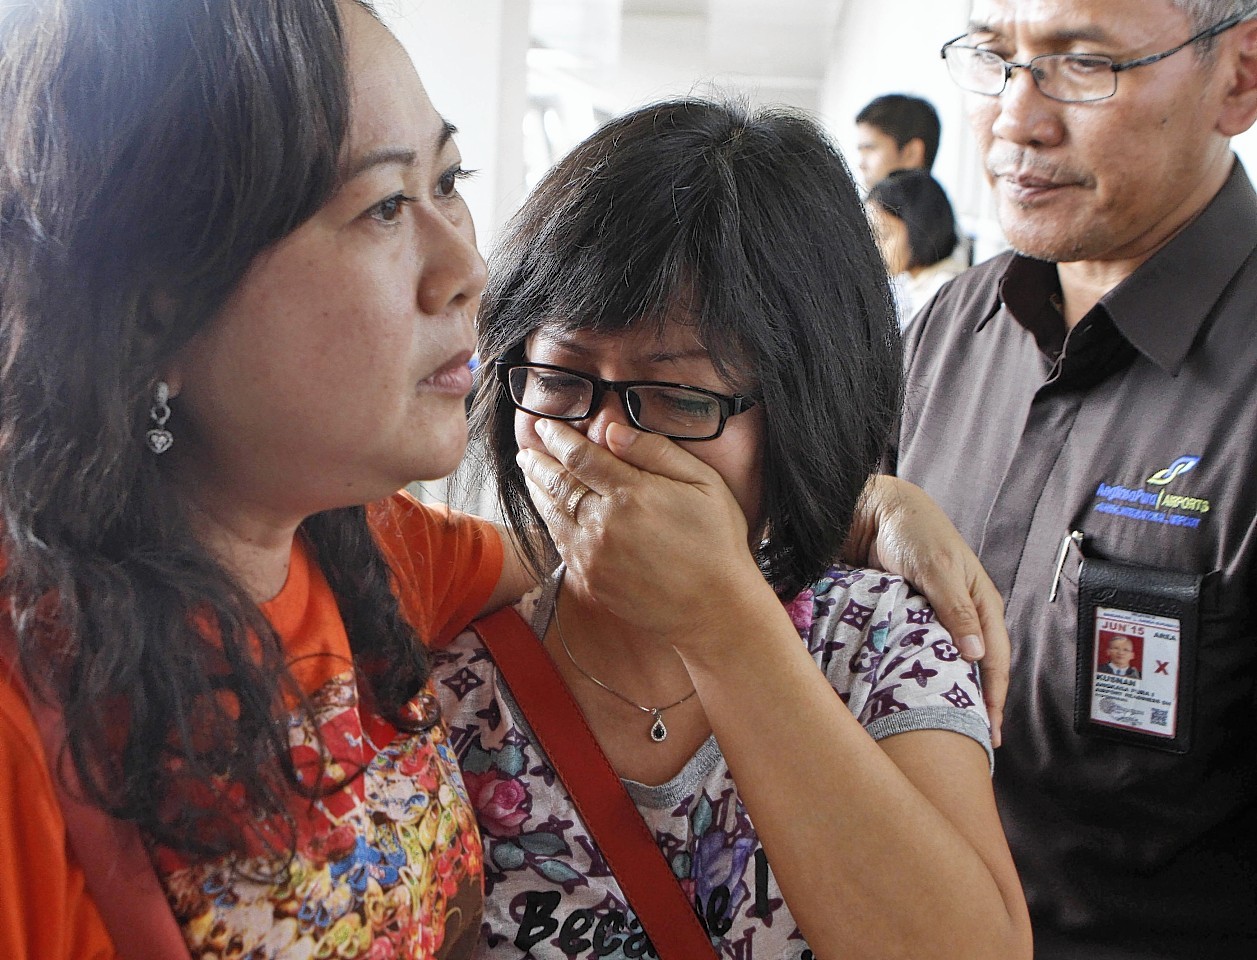 Relatives of Air Asia flight QZ8501 are waiting for the latest news on the missing jetliner at Juanda International Airport in Surabaya, East Java, Indonesia.